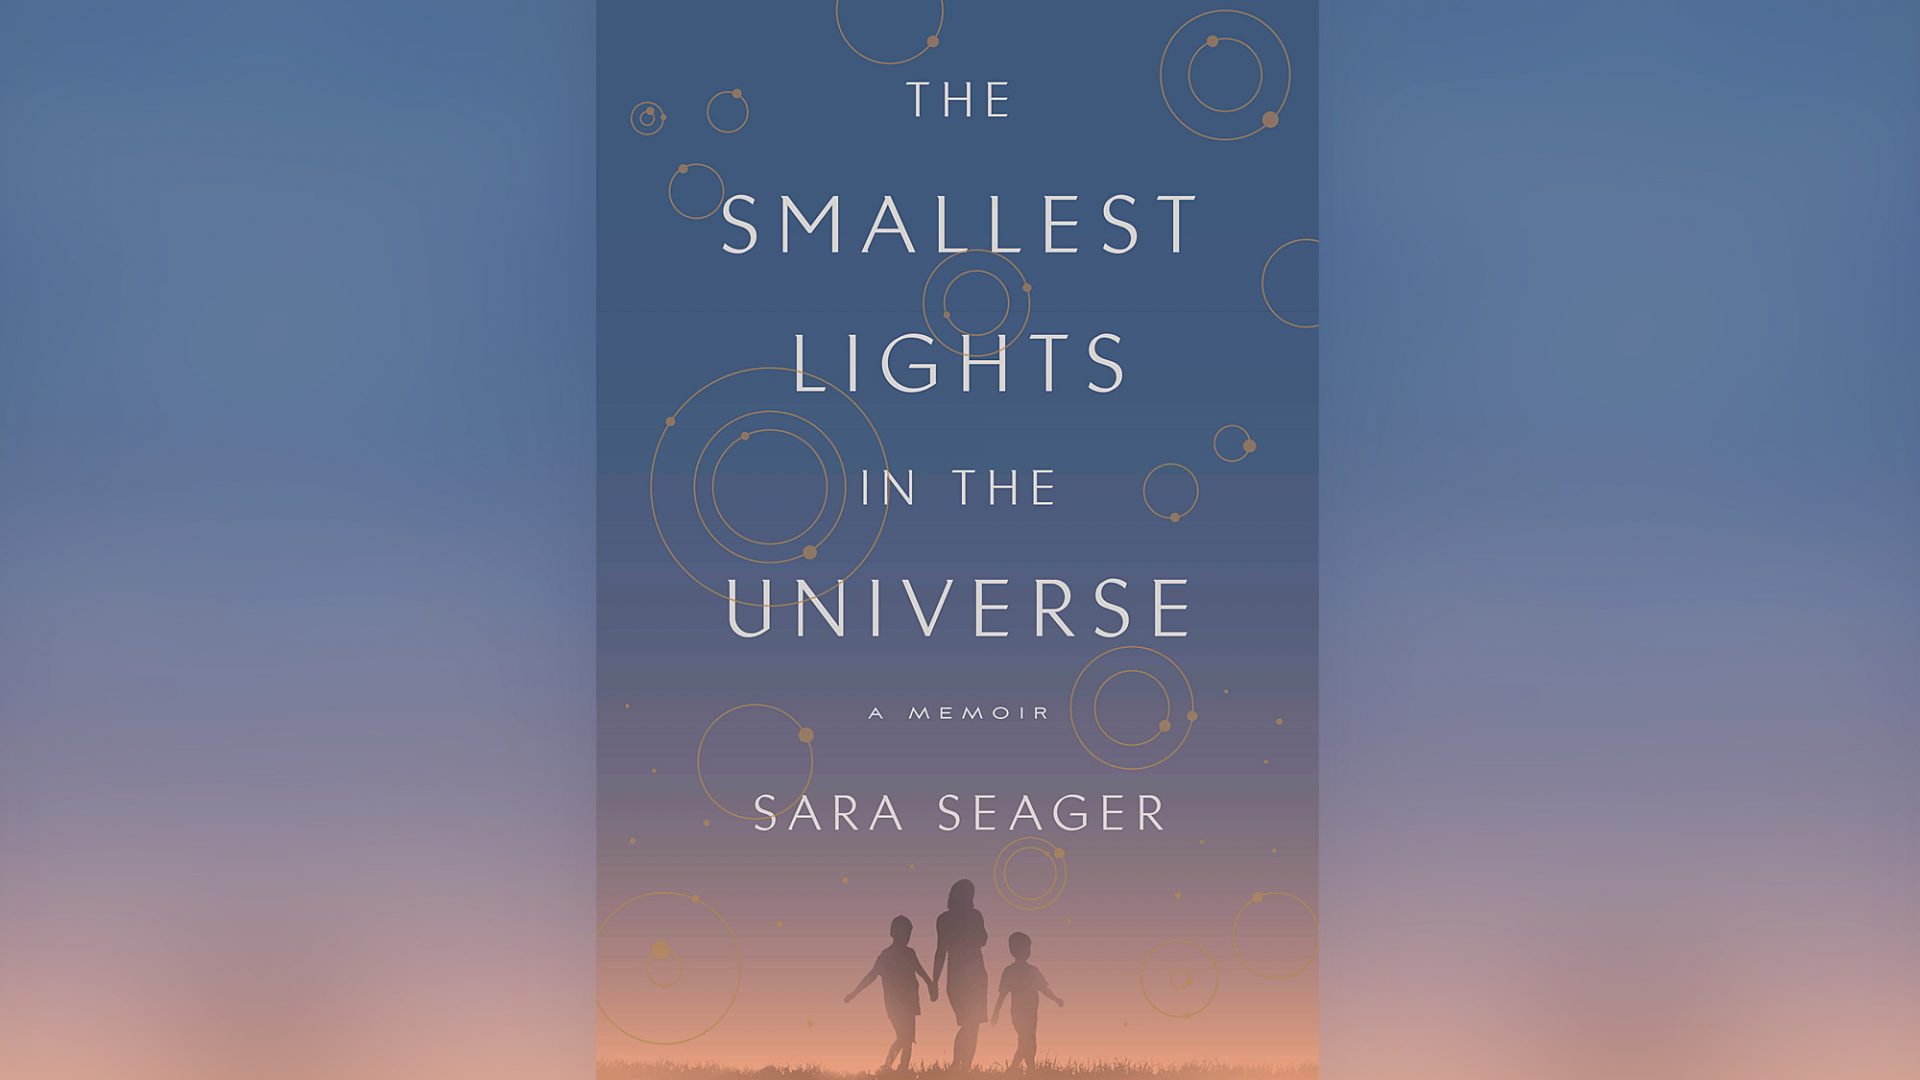 E book excerpt: ‘The Smallest Lights within the Universe’